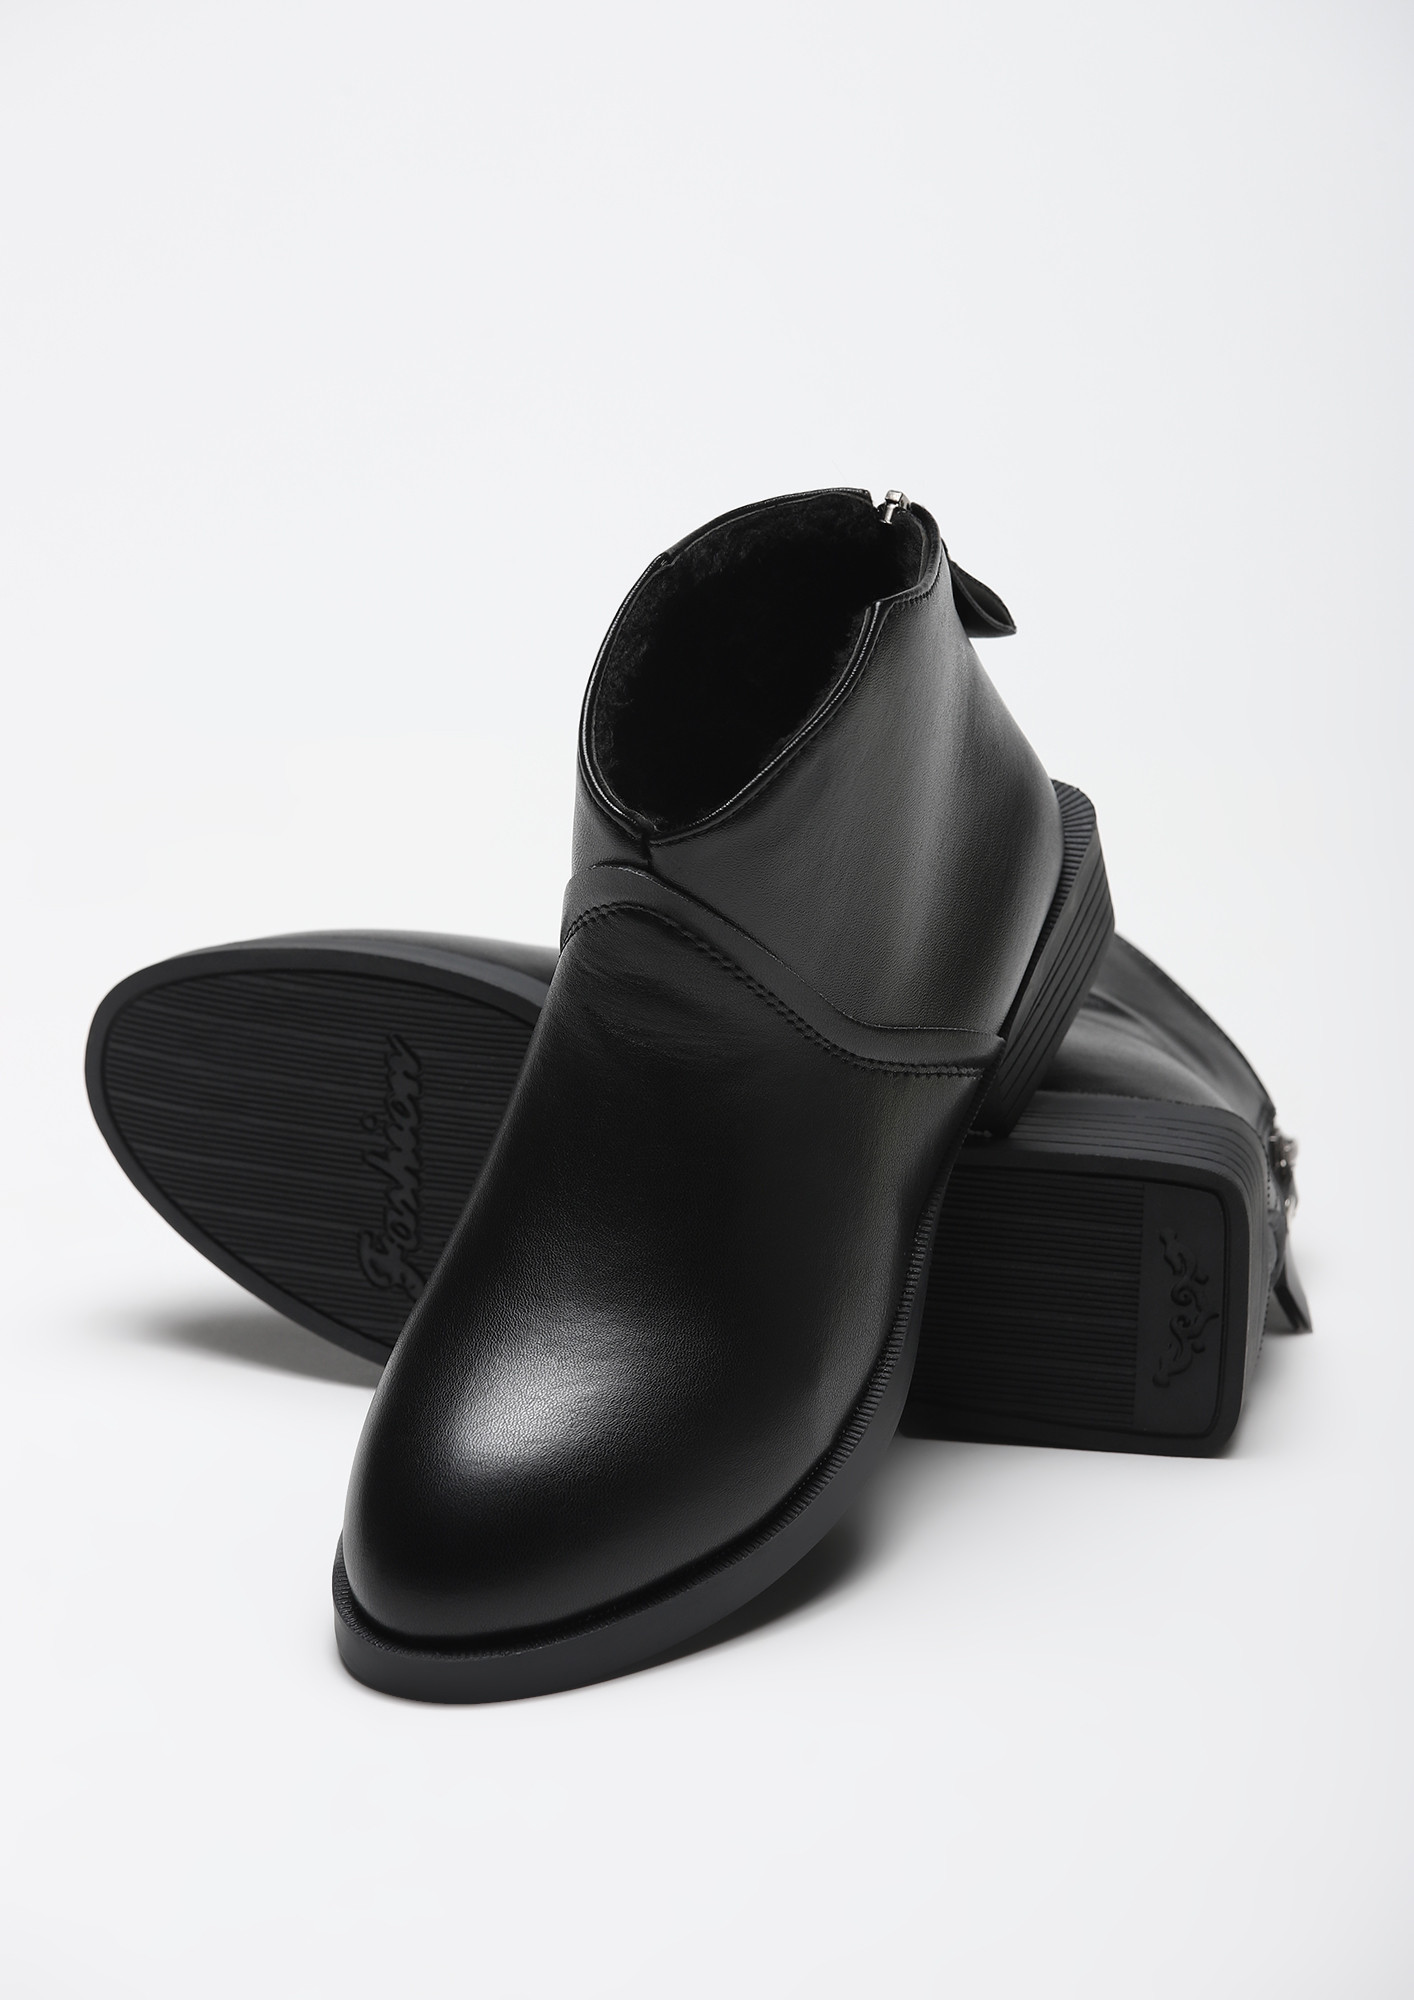 NEED A CLASSIC UPDATE BLACK ANKLE BOOTS